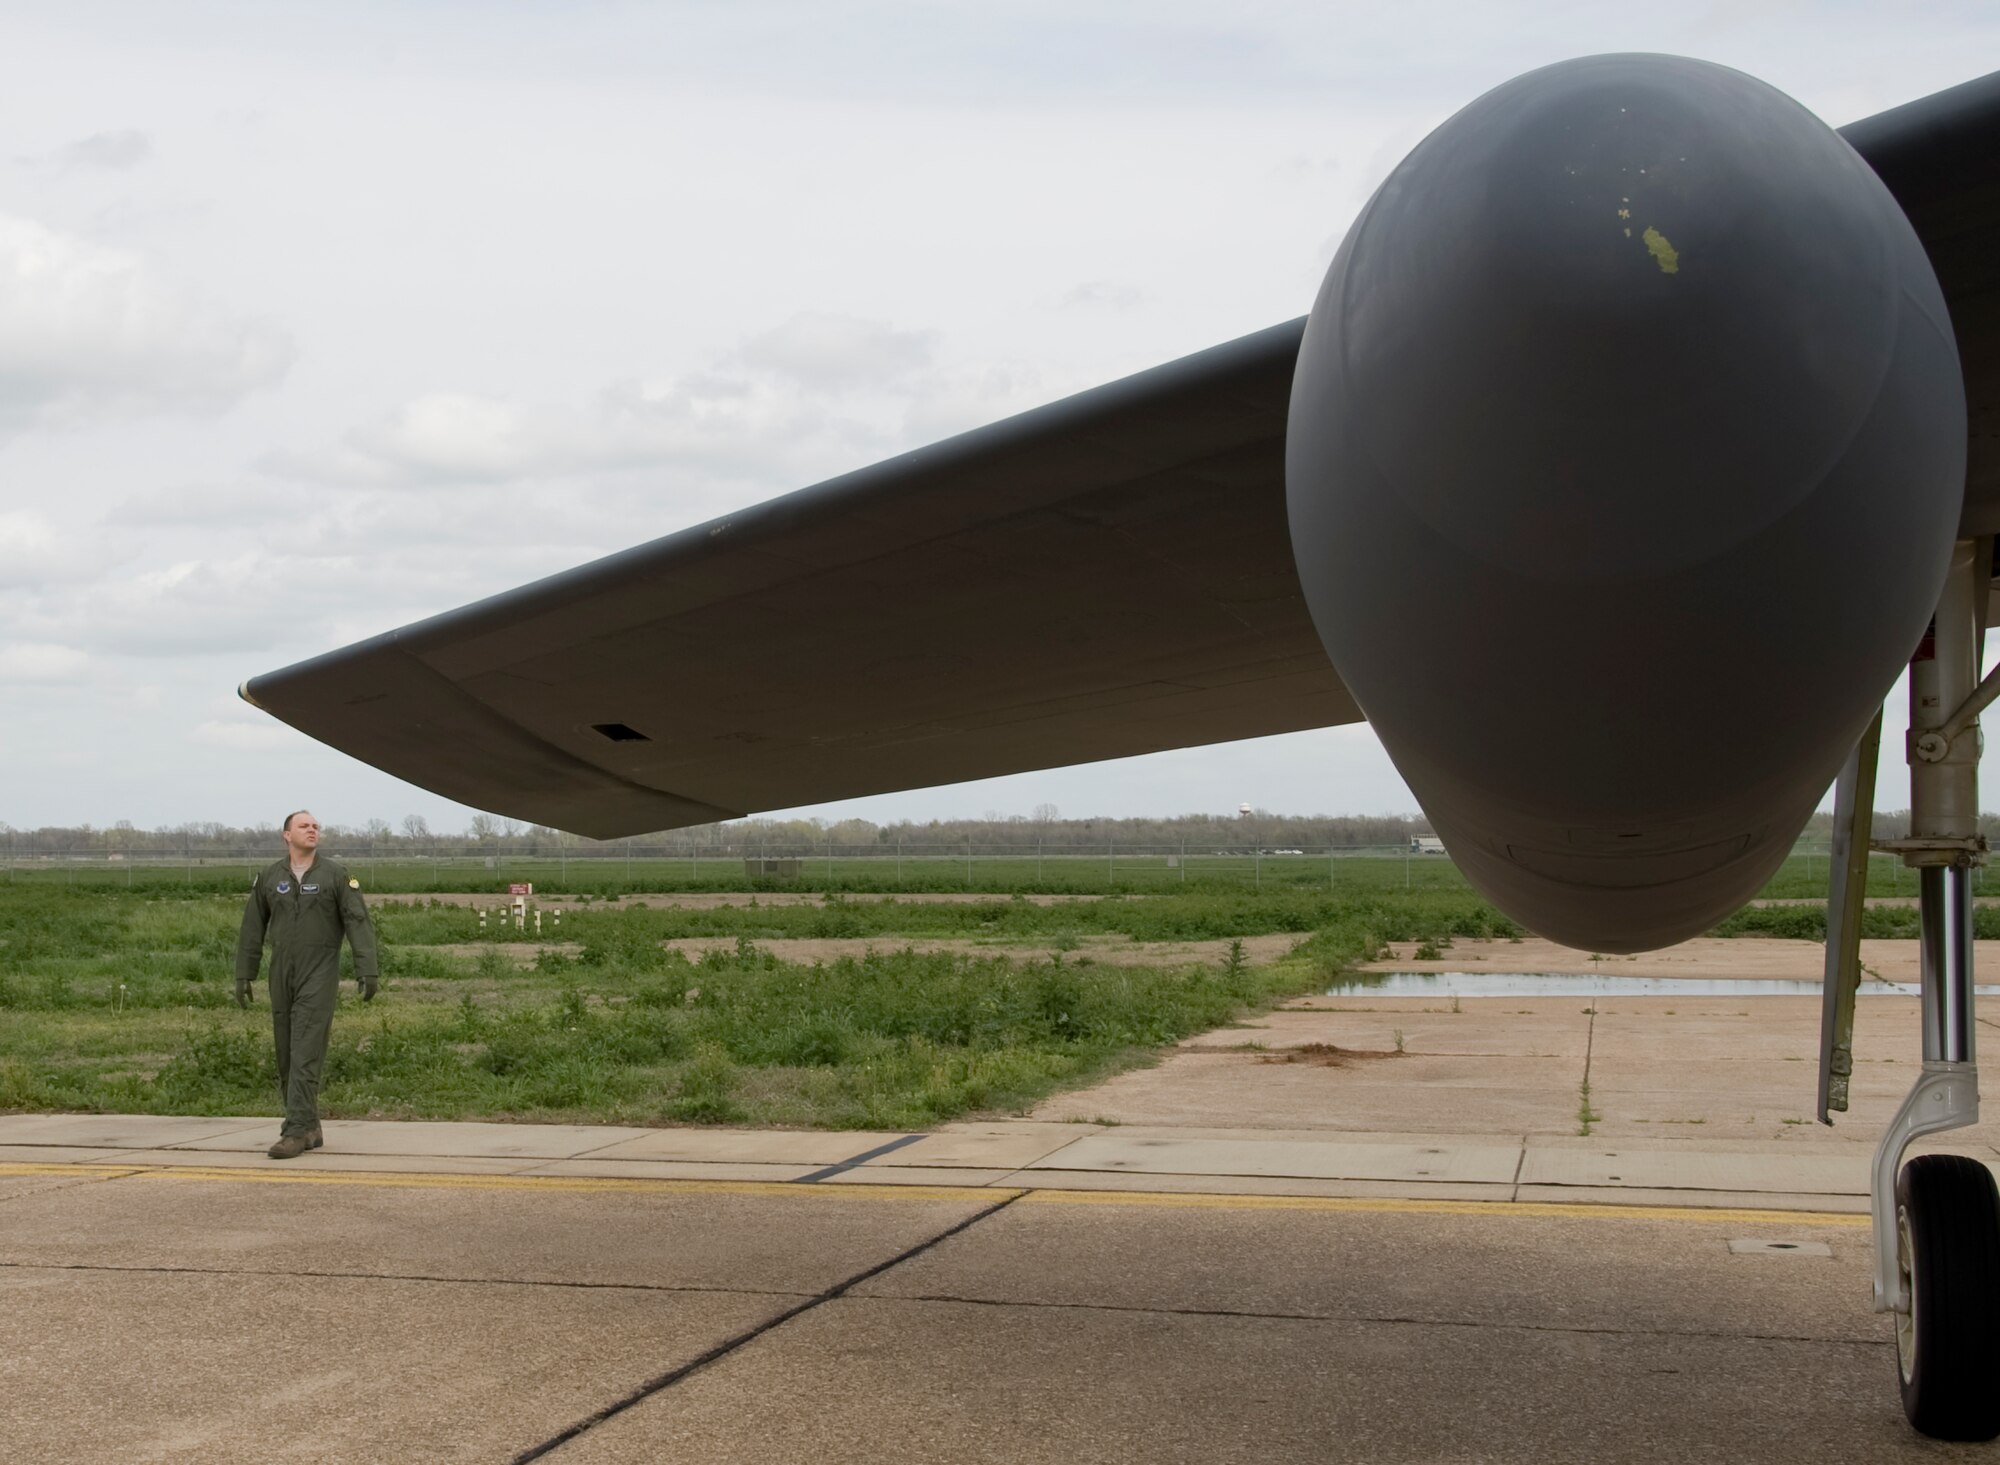 Maj. Brian Sealock, 20th Bomb Squadron, inspects the wing of a B-52H Stratofortress on Barksdale Air Force Base, La., March 13. Members of the aircrew inspect the aircraft before going inside. Each member has his or her own specific items of interest they look at as they conduct their inspections before takeoff. (U.S. Air Force photo/Airman 1st Class Benjamin Gonsier)(RELEASED)
